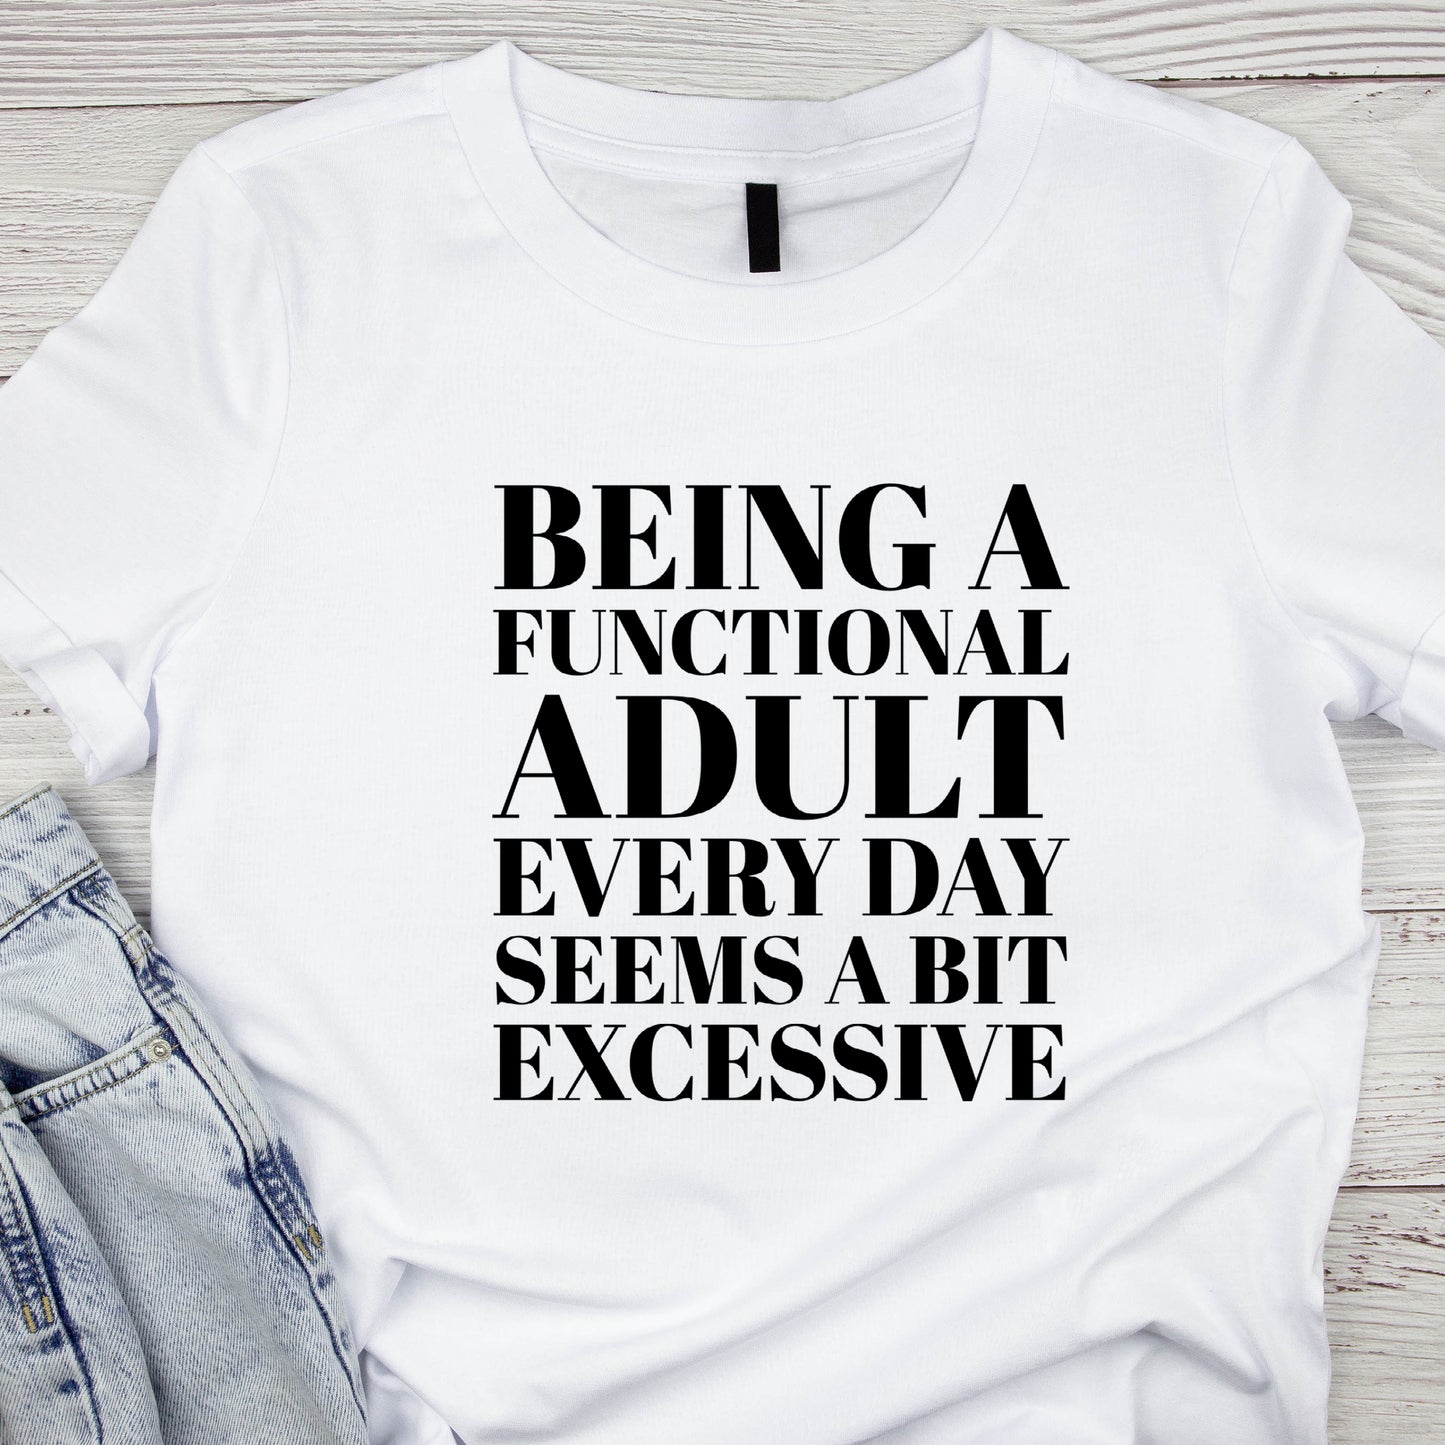 Functional Adult T-Shirt For Sarcastic Adult TShirt For Funny Quote T Shirt For Adult Children TShirt Humorous Tee For Funny Gift Shirt